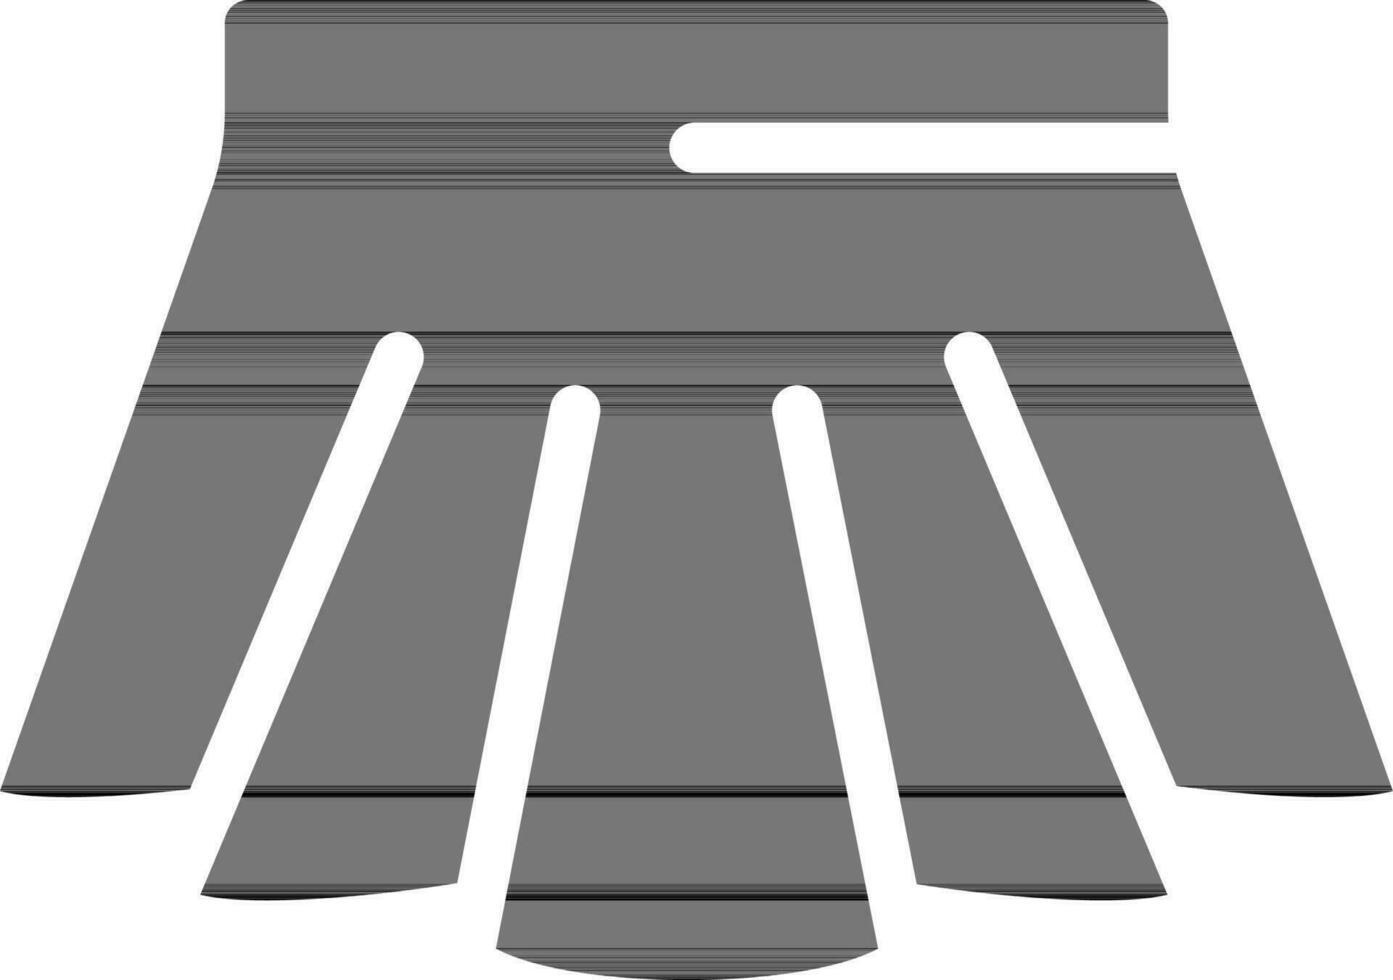 Skirt Icon In Black And White Color. vector